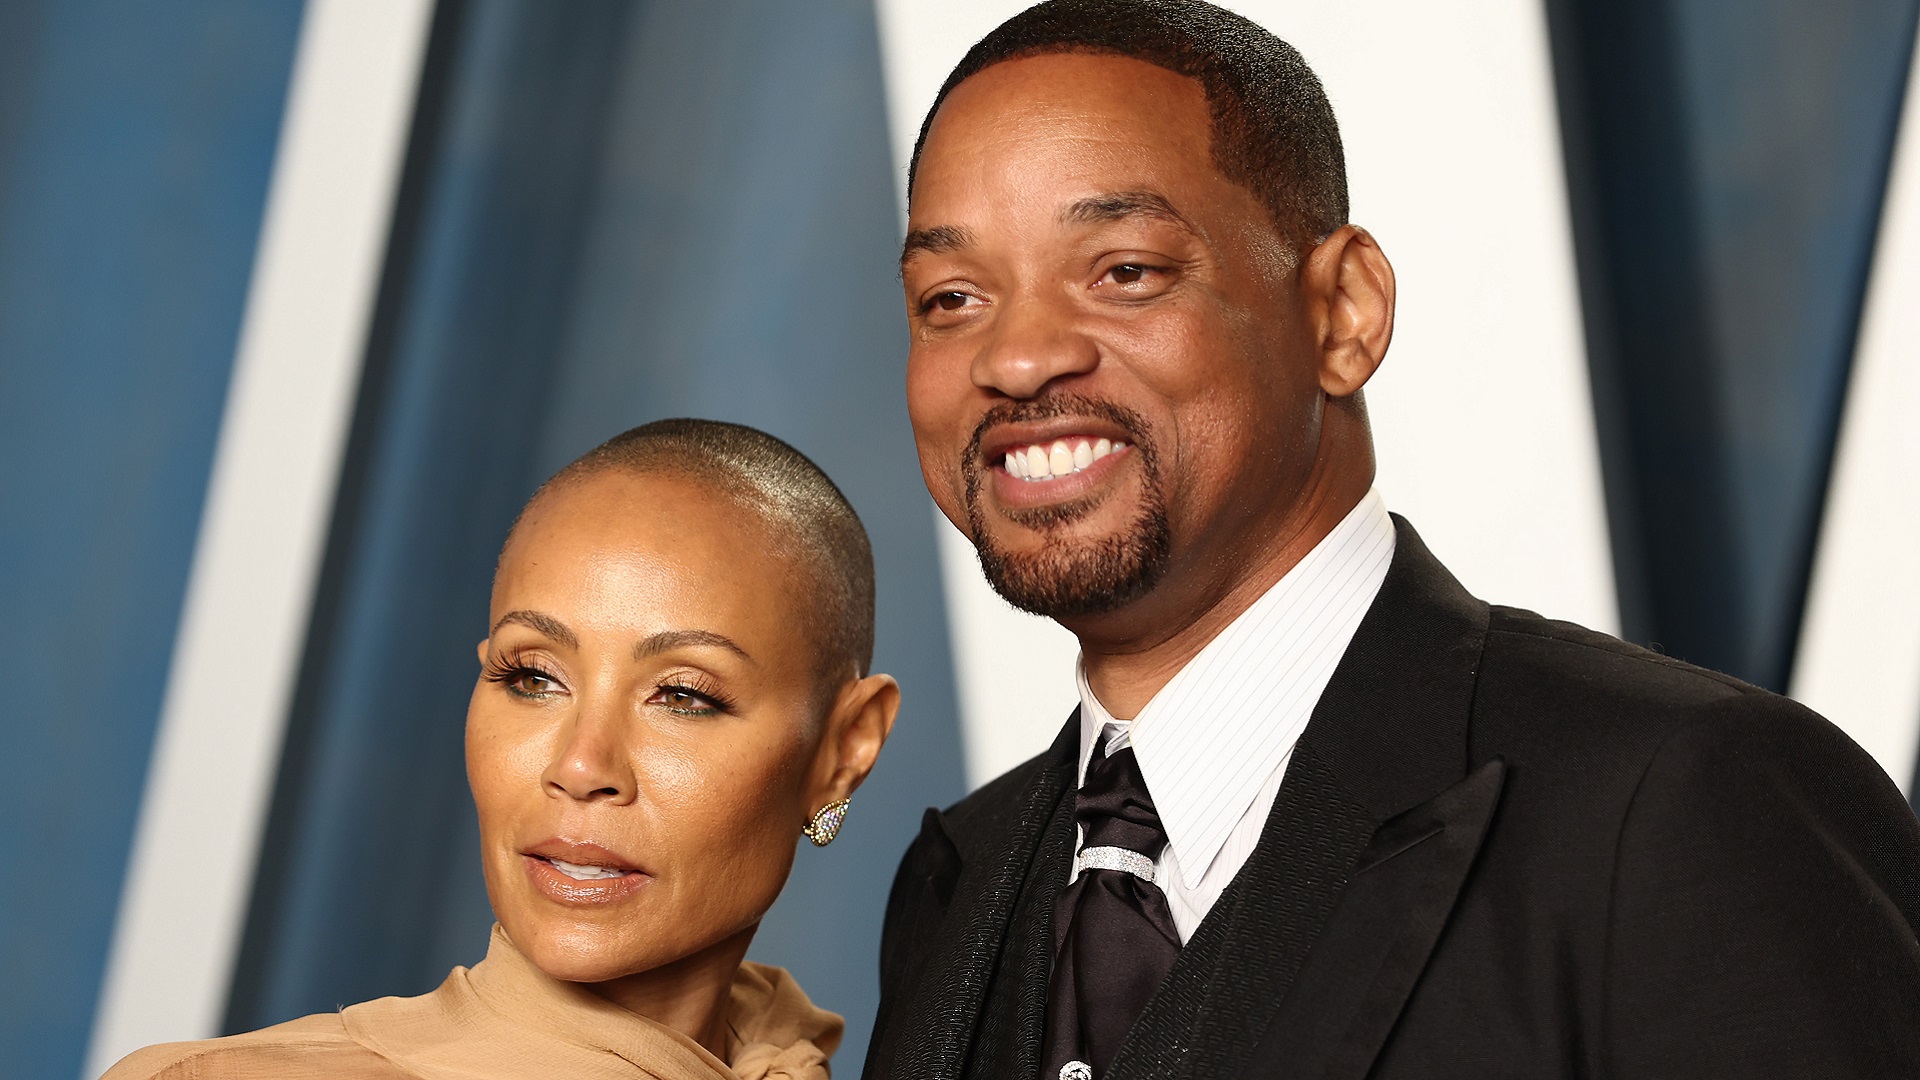 The remarkable family of Will and Jada Pinkett Smith